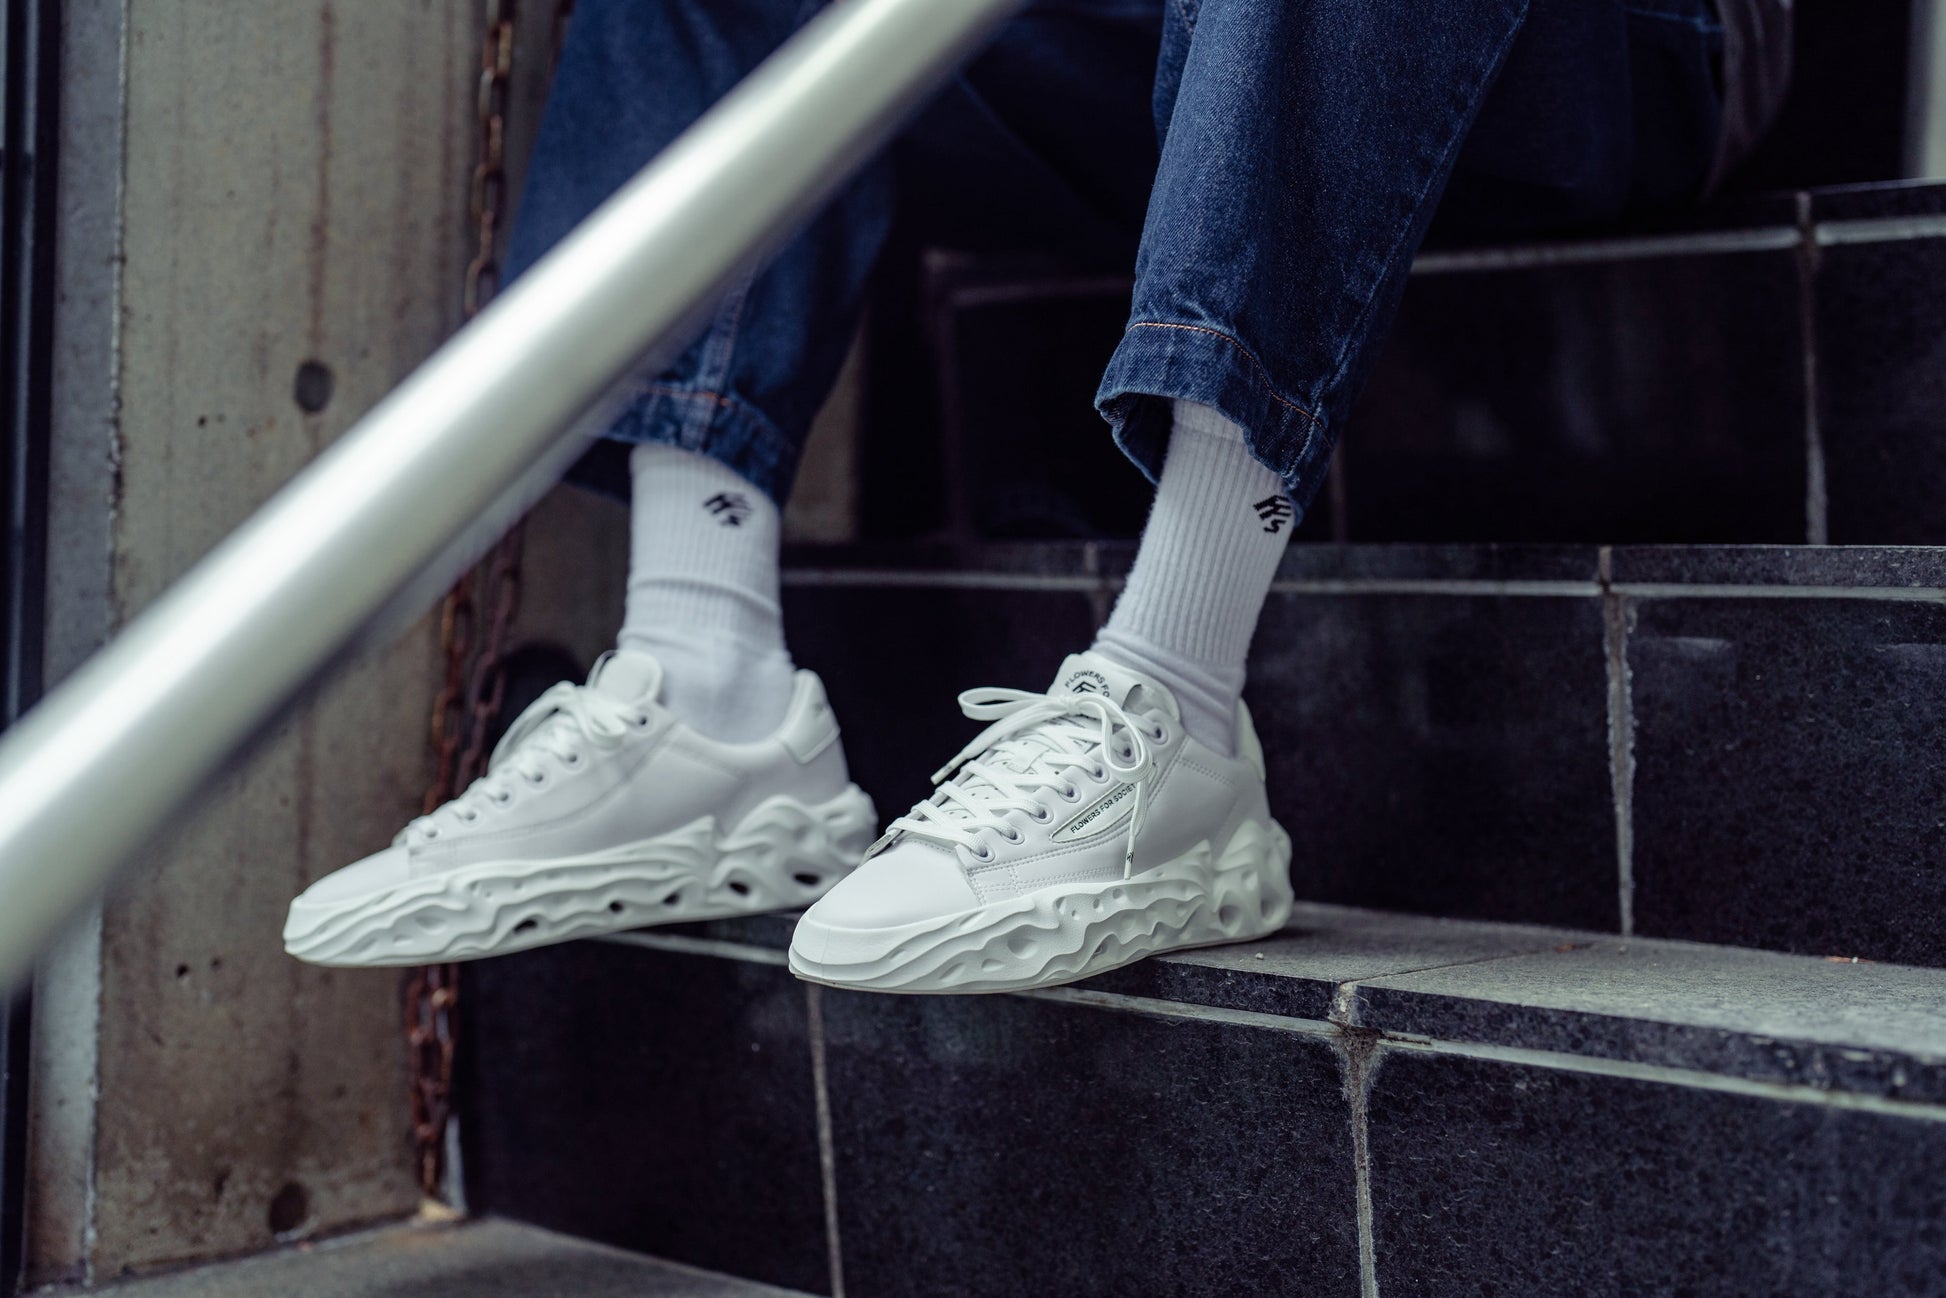 Flowers For Society Sneaker Radicle Topless white sideview worn by model sitting on stairs